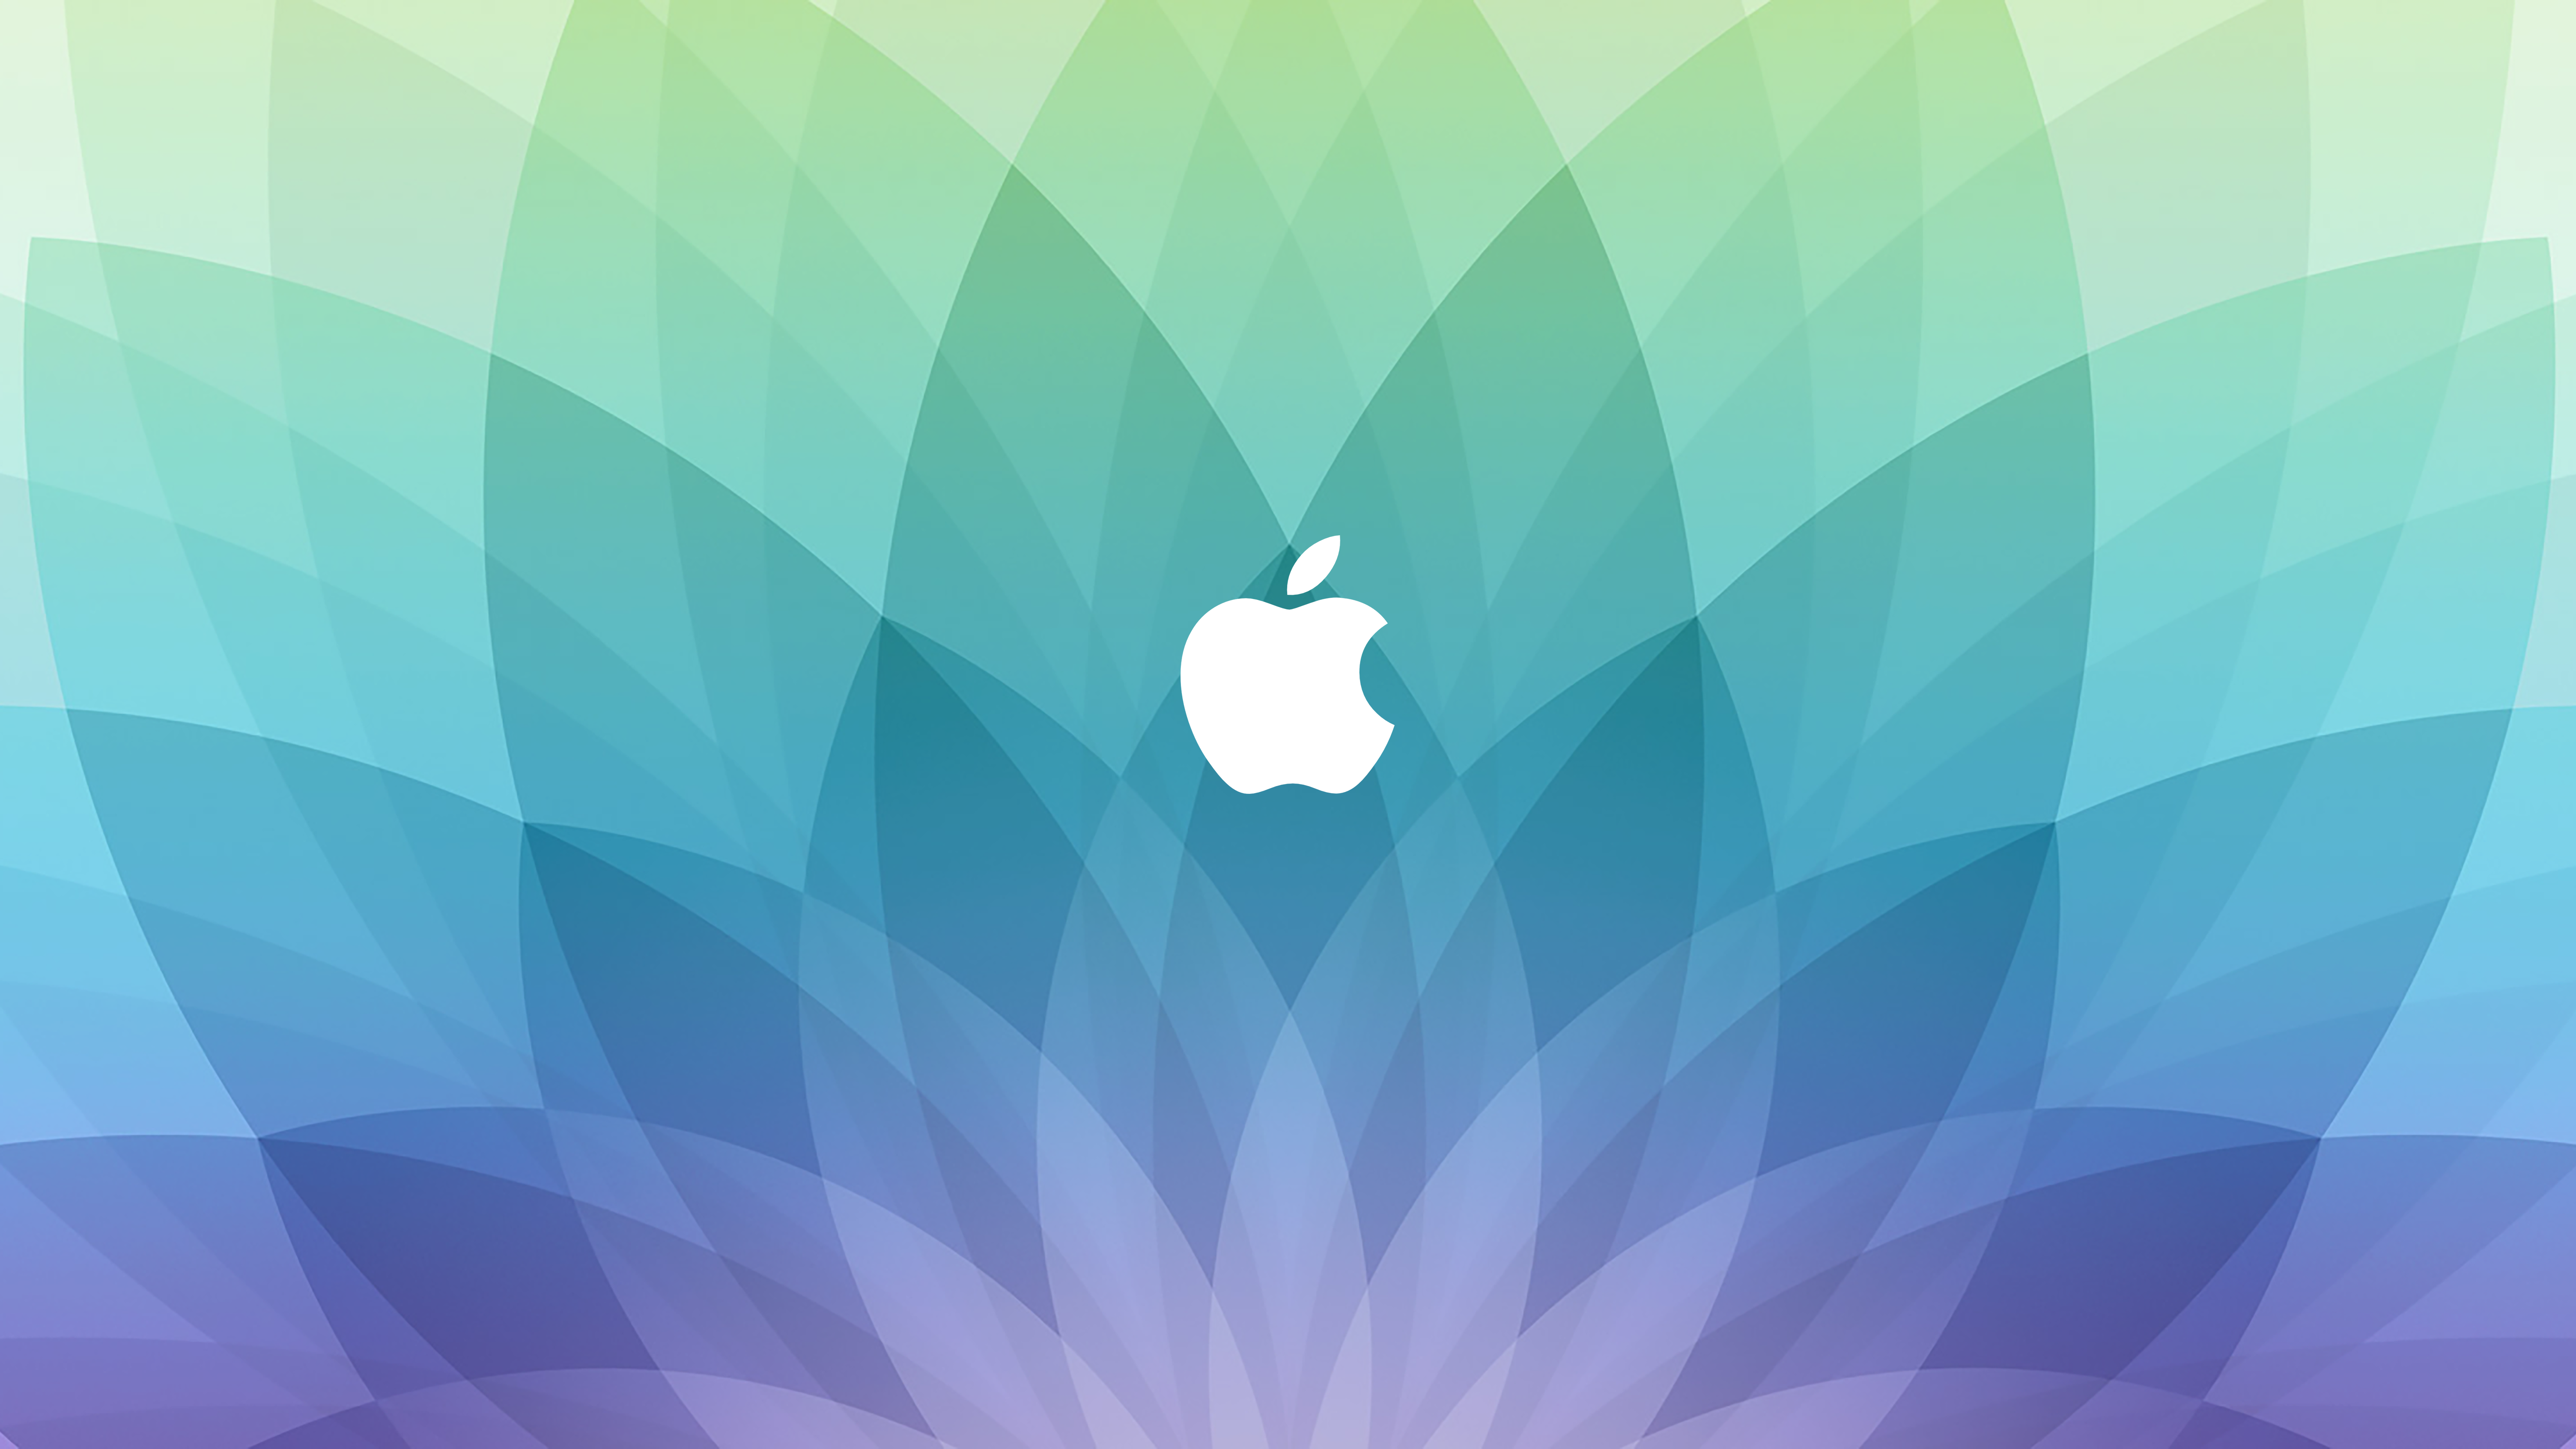 Download These Beautiful Apple Spring Forward Event Wallpapers